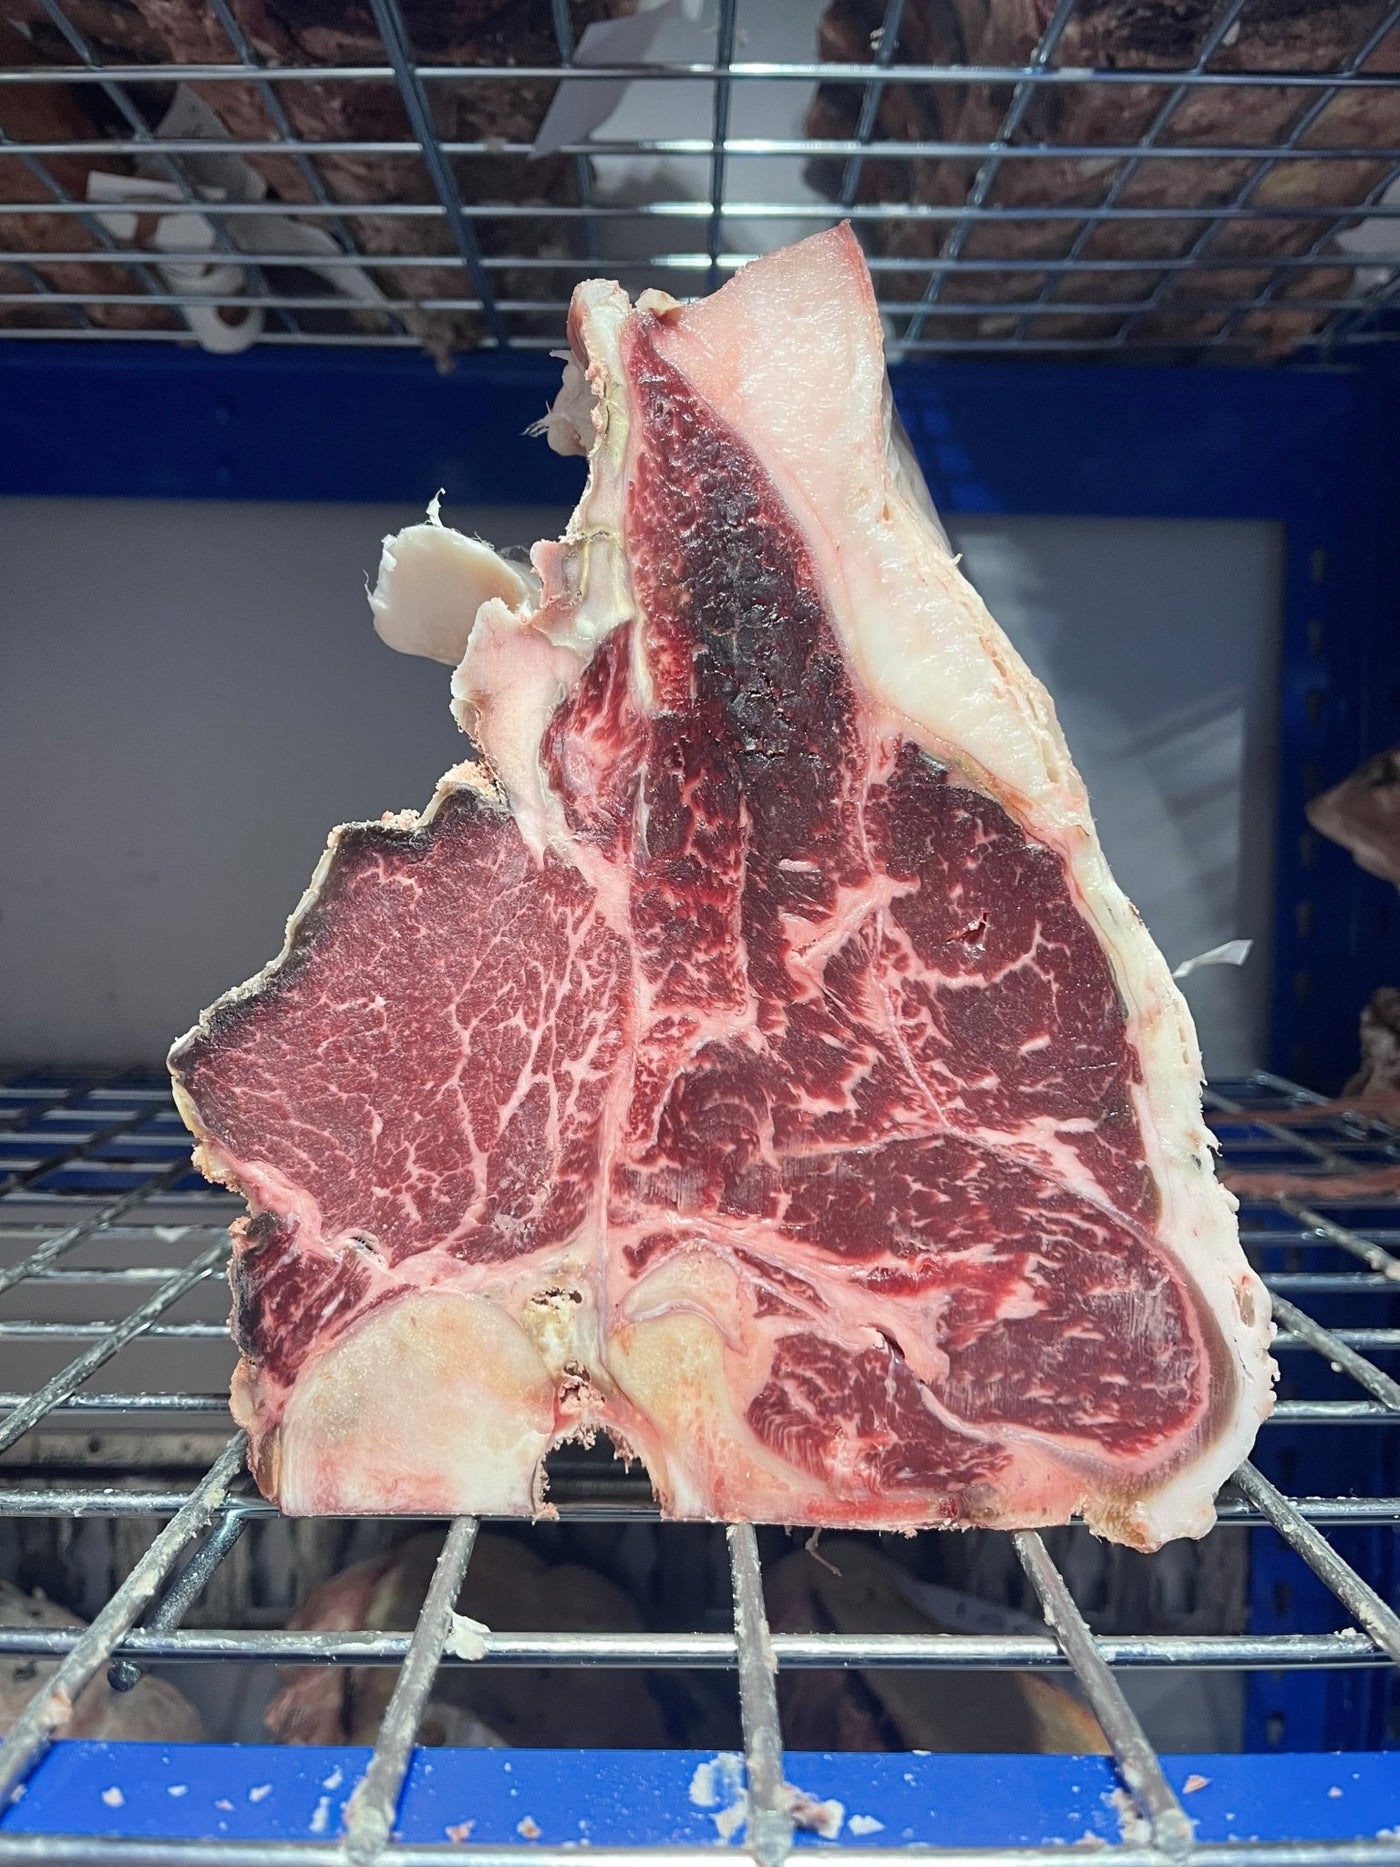 75 Day Dry-Aged Hereford Cross - Thomas Joseph Butchery - Ethical Dry-Aged Meat The Best Steak UK Thomas Joseph Butchery